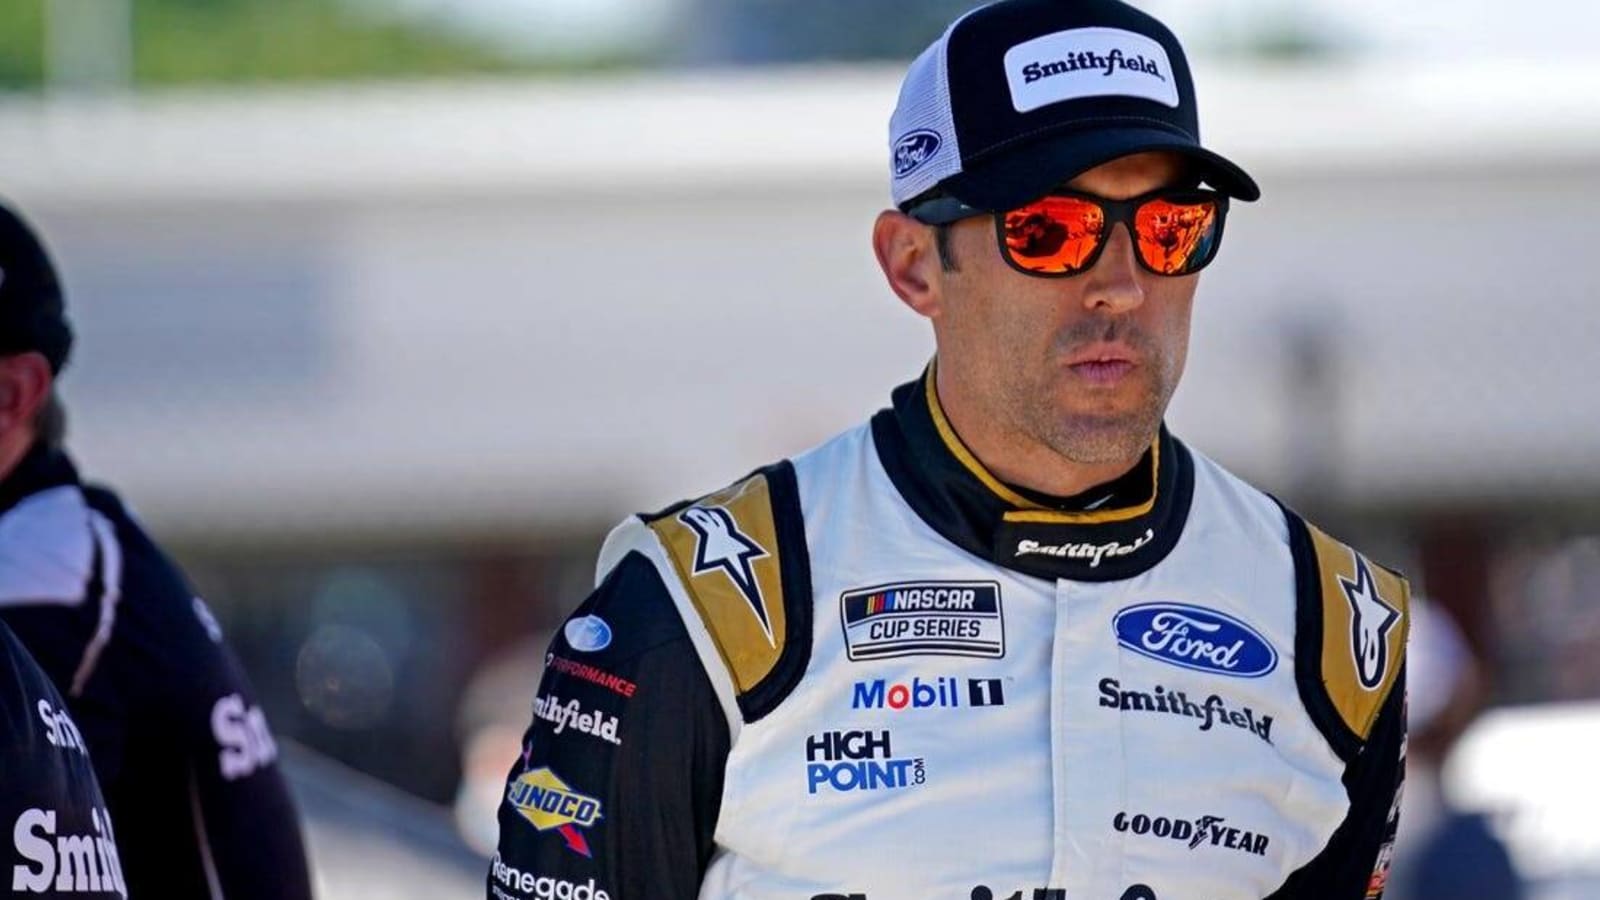 Cup Series driver Aric Almirola says 2023 plans up in air